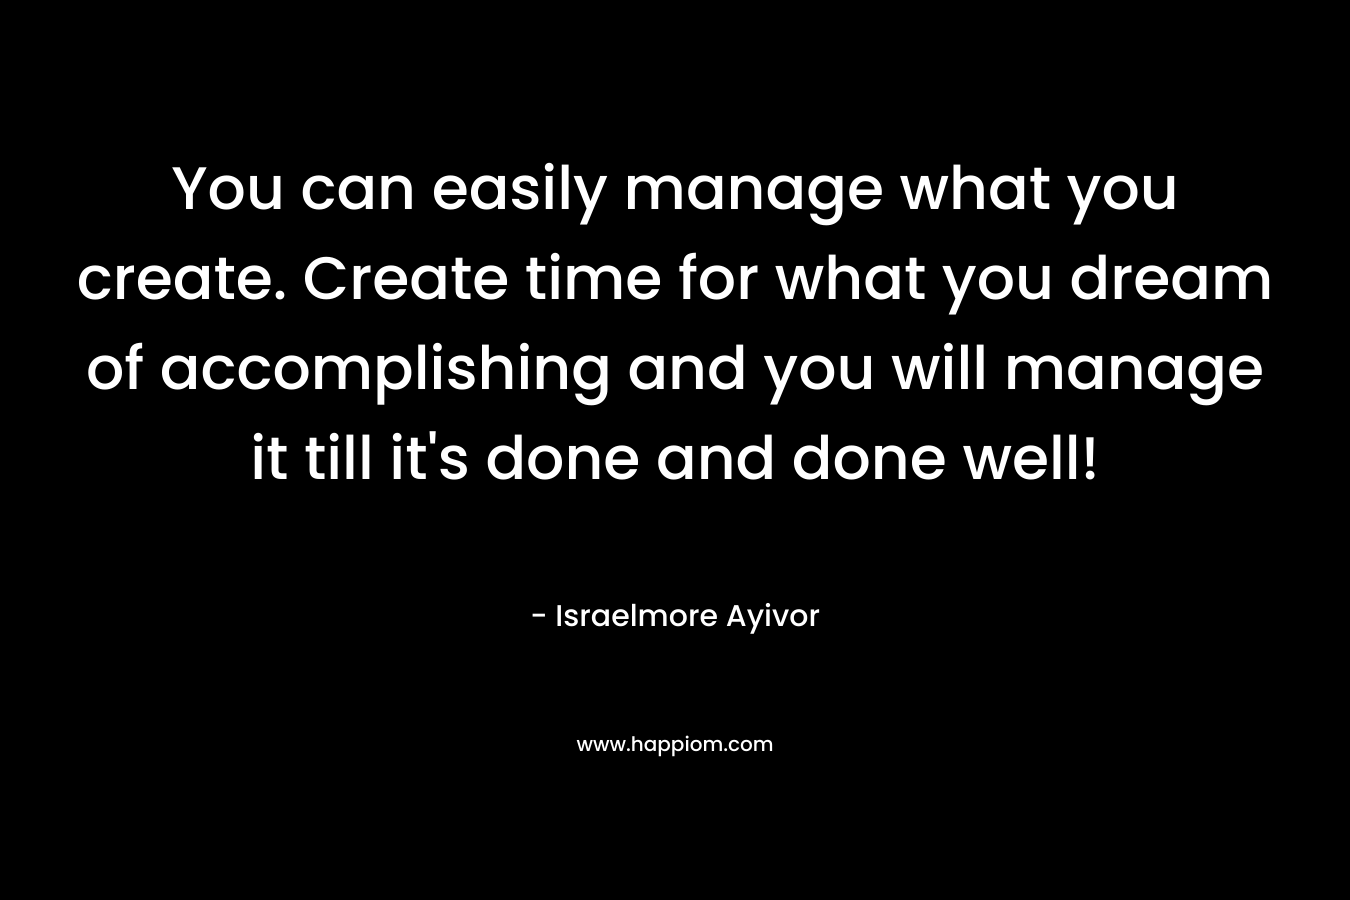 You can easily manage what you create. Create time for what you dream of accomplishing and you will manage it till it's done and done well!